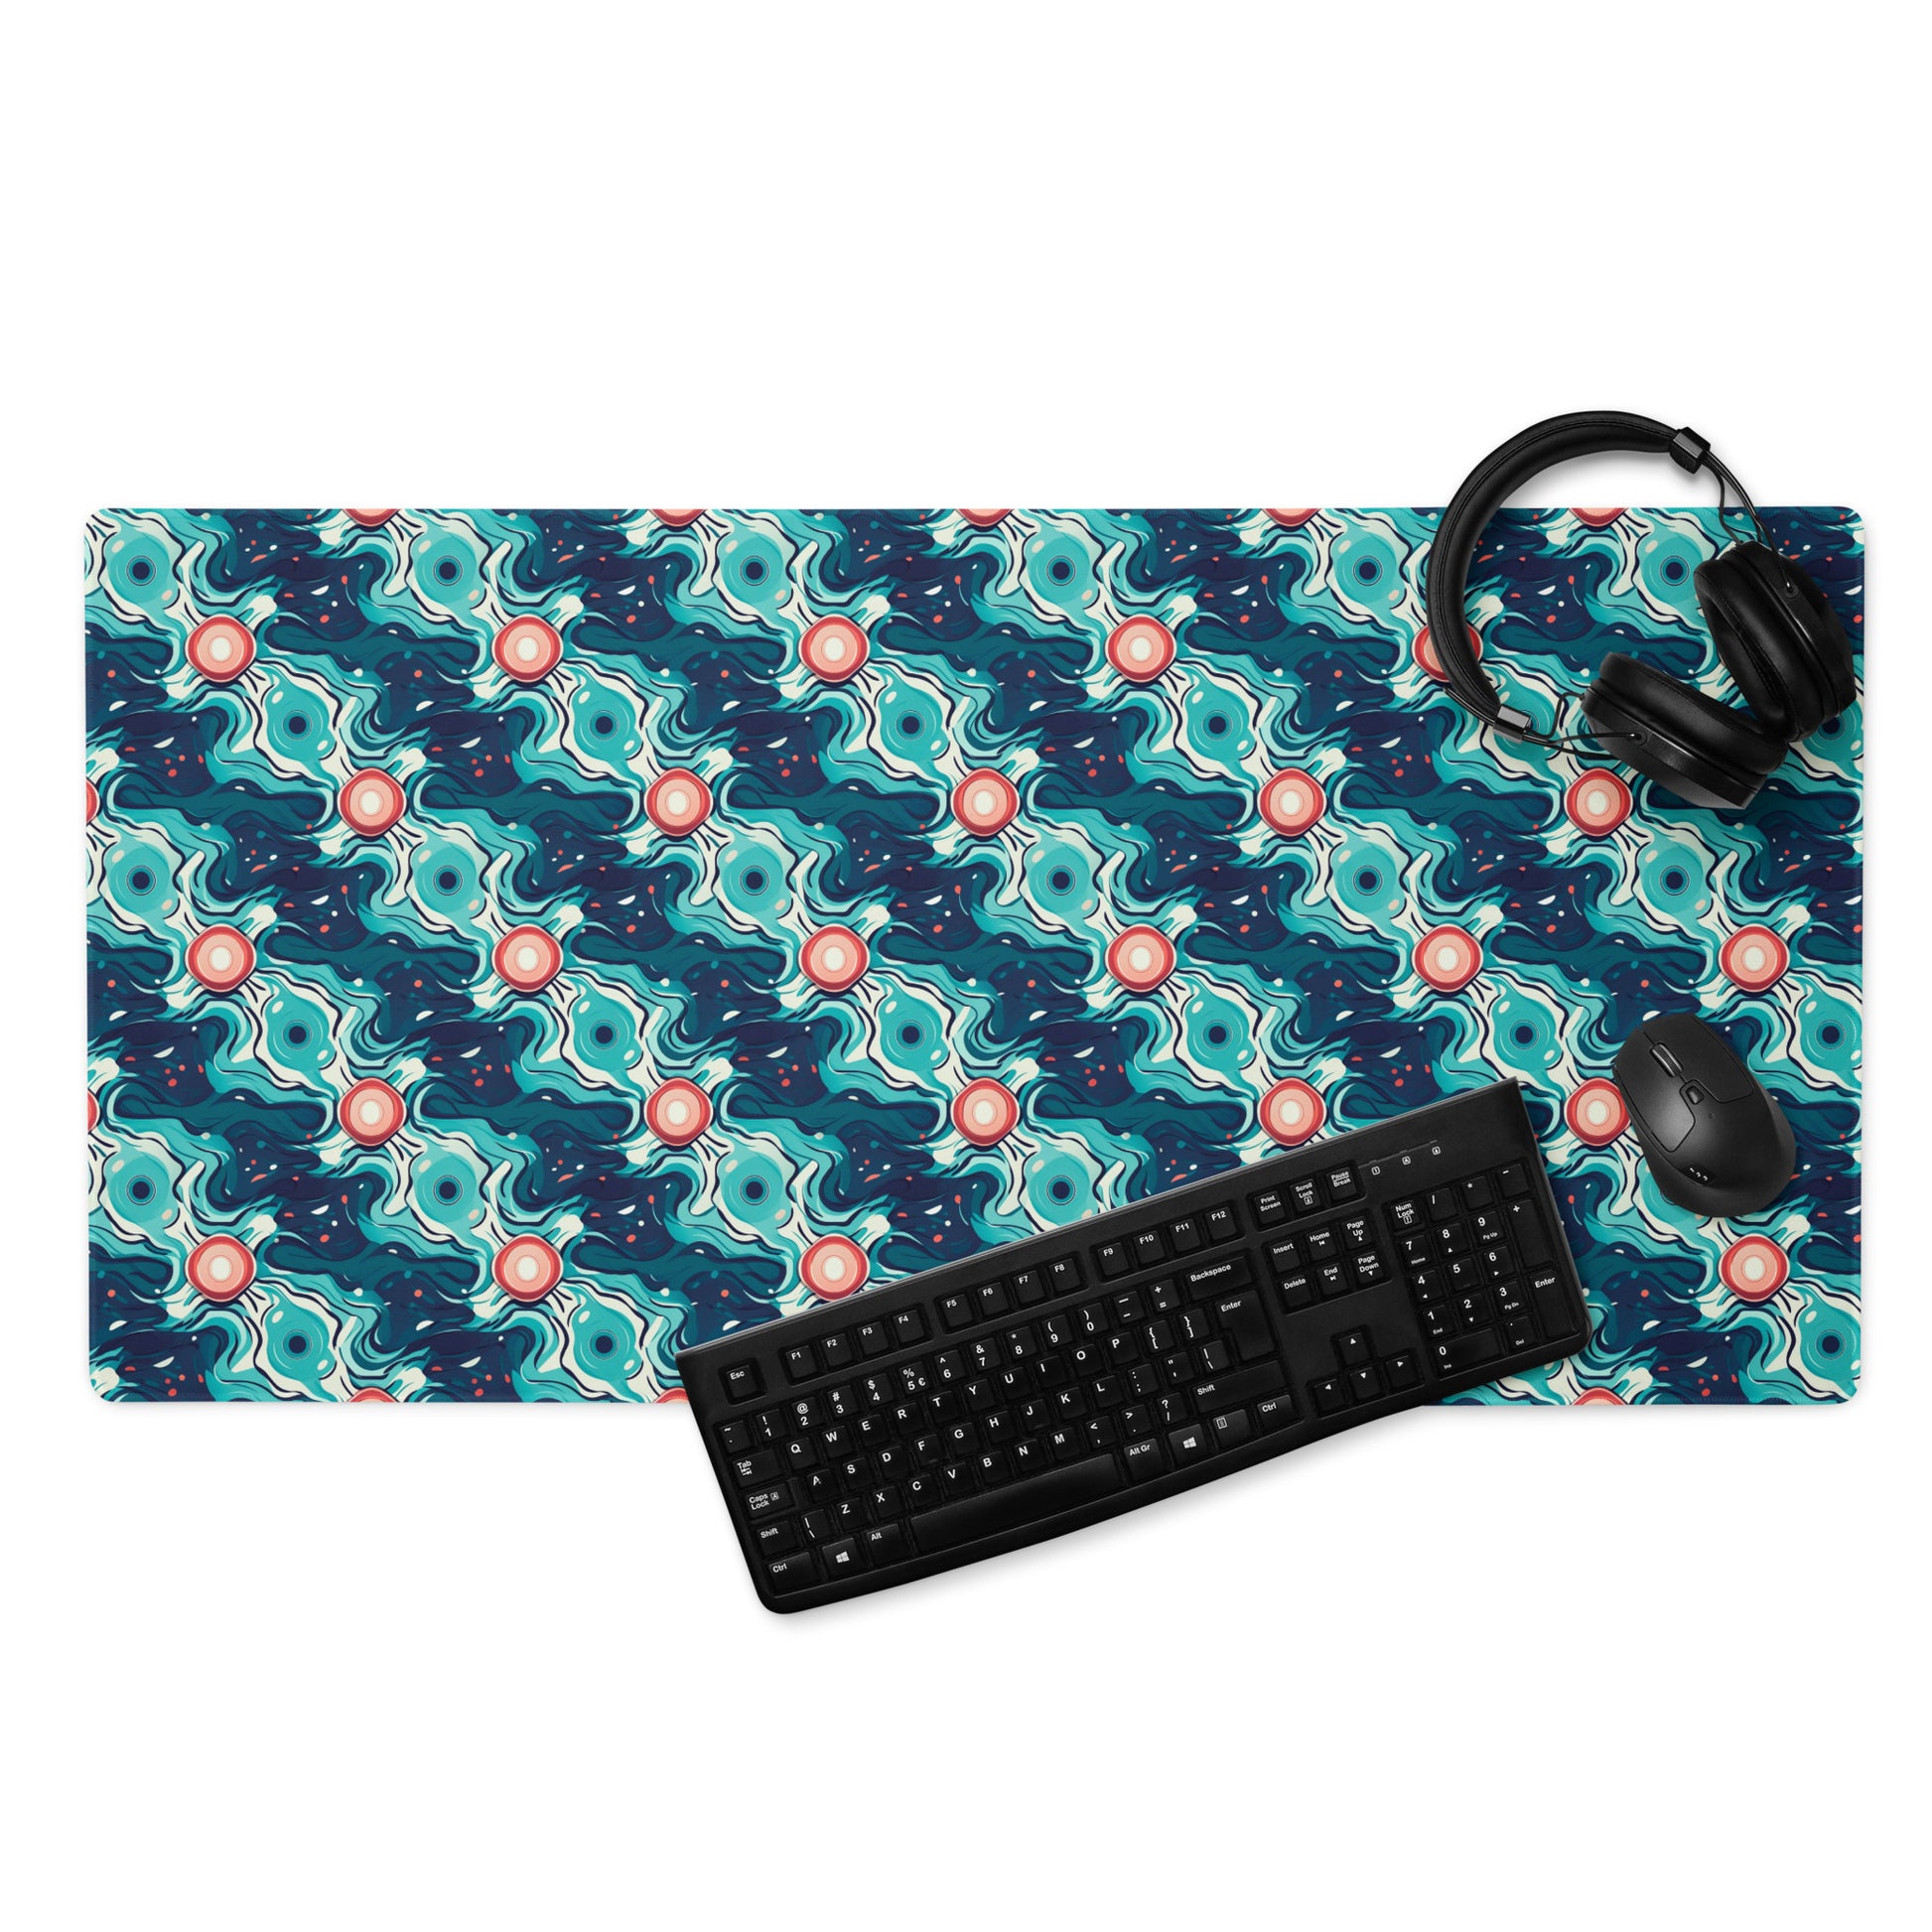 A 36" x 18" desk pad with a teal abstract wavy pattern. With a keyboard, mouse, and headphones sitting on it.